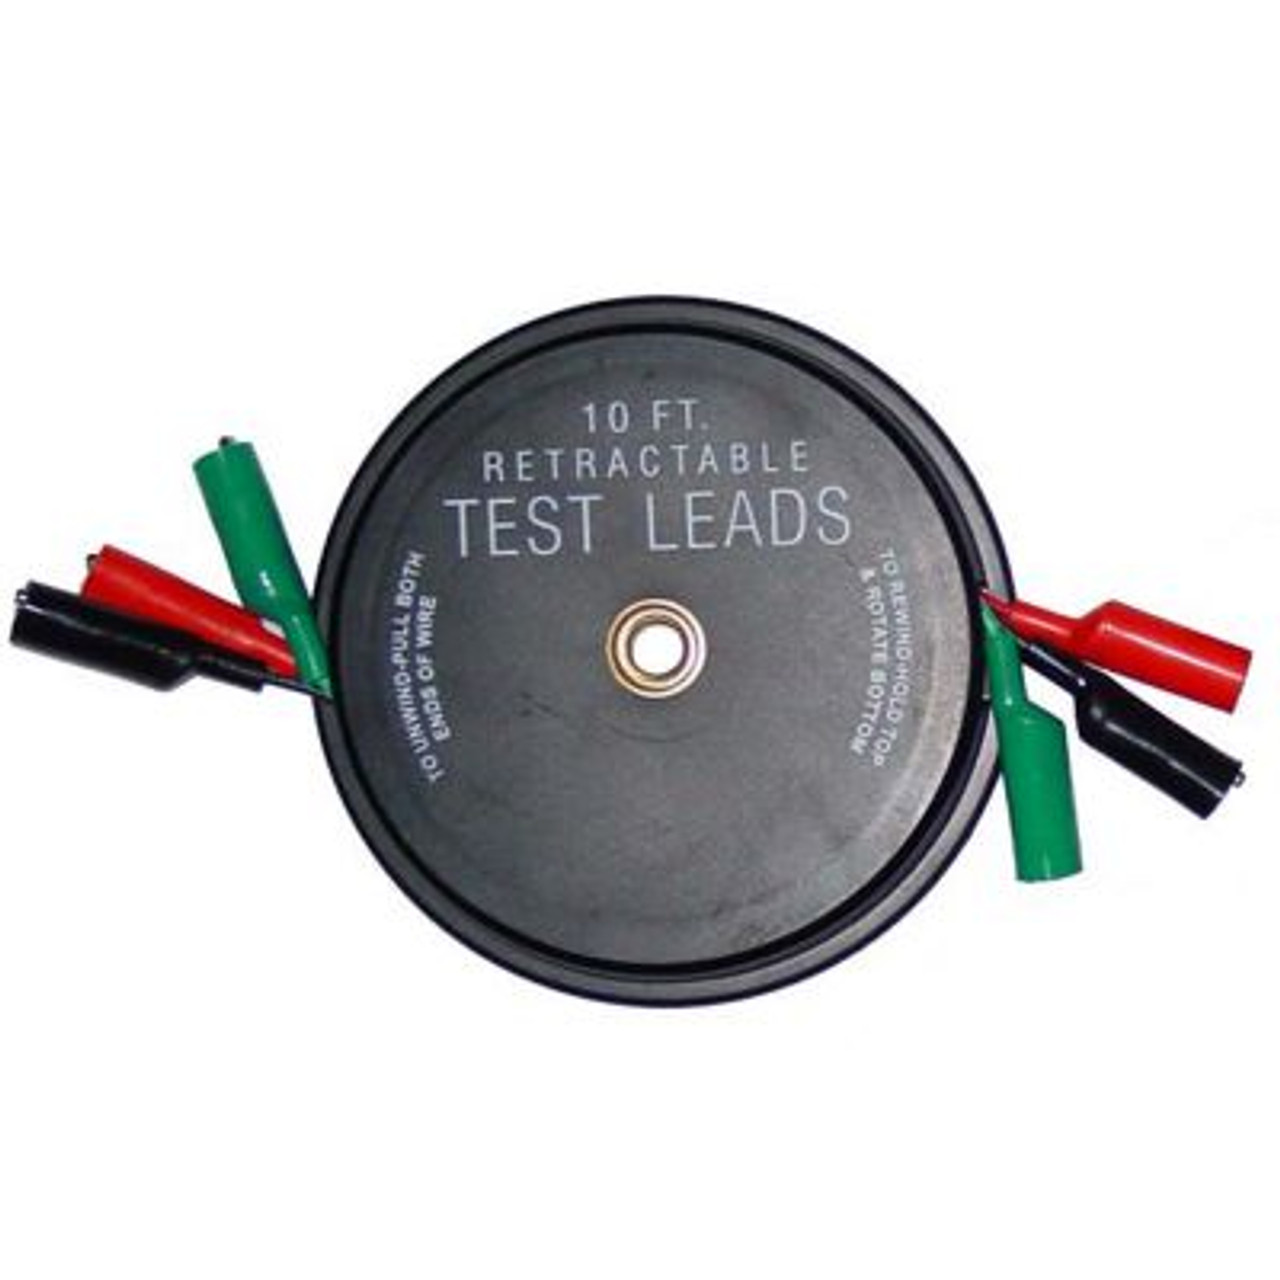 3 x 10' Retractable Test Leads